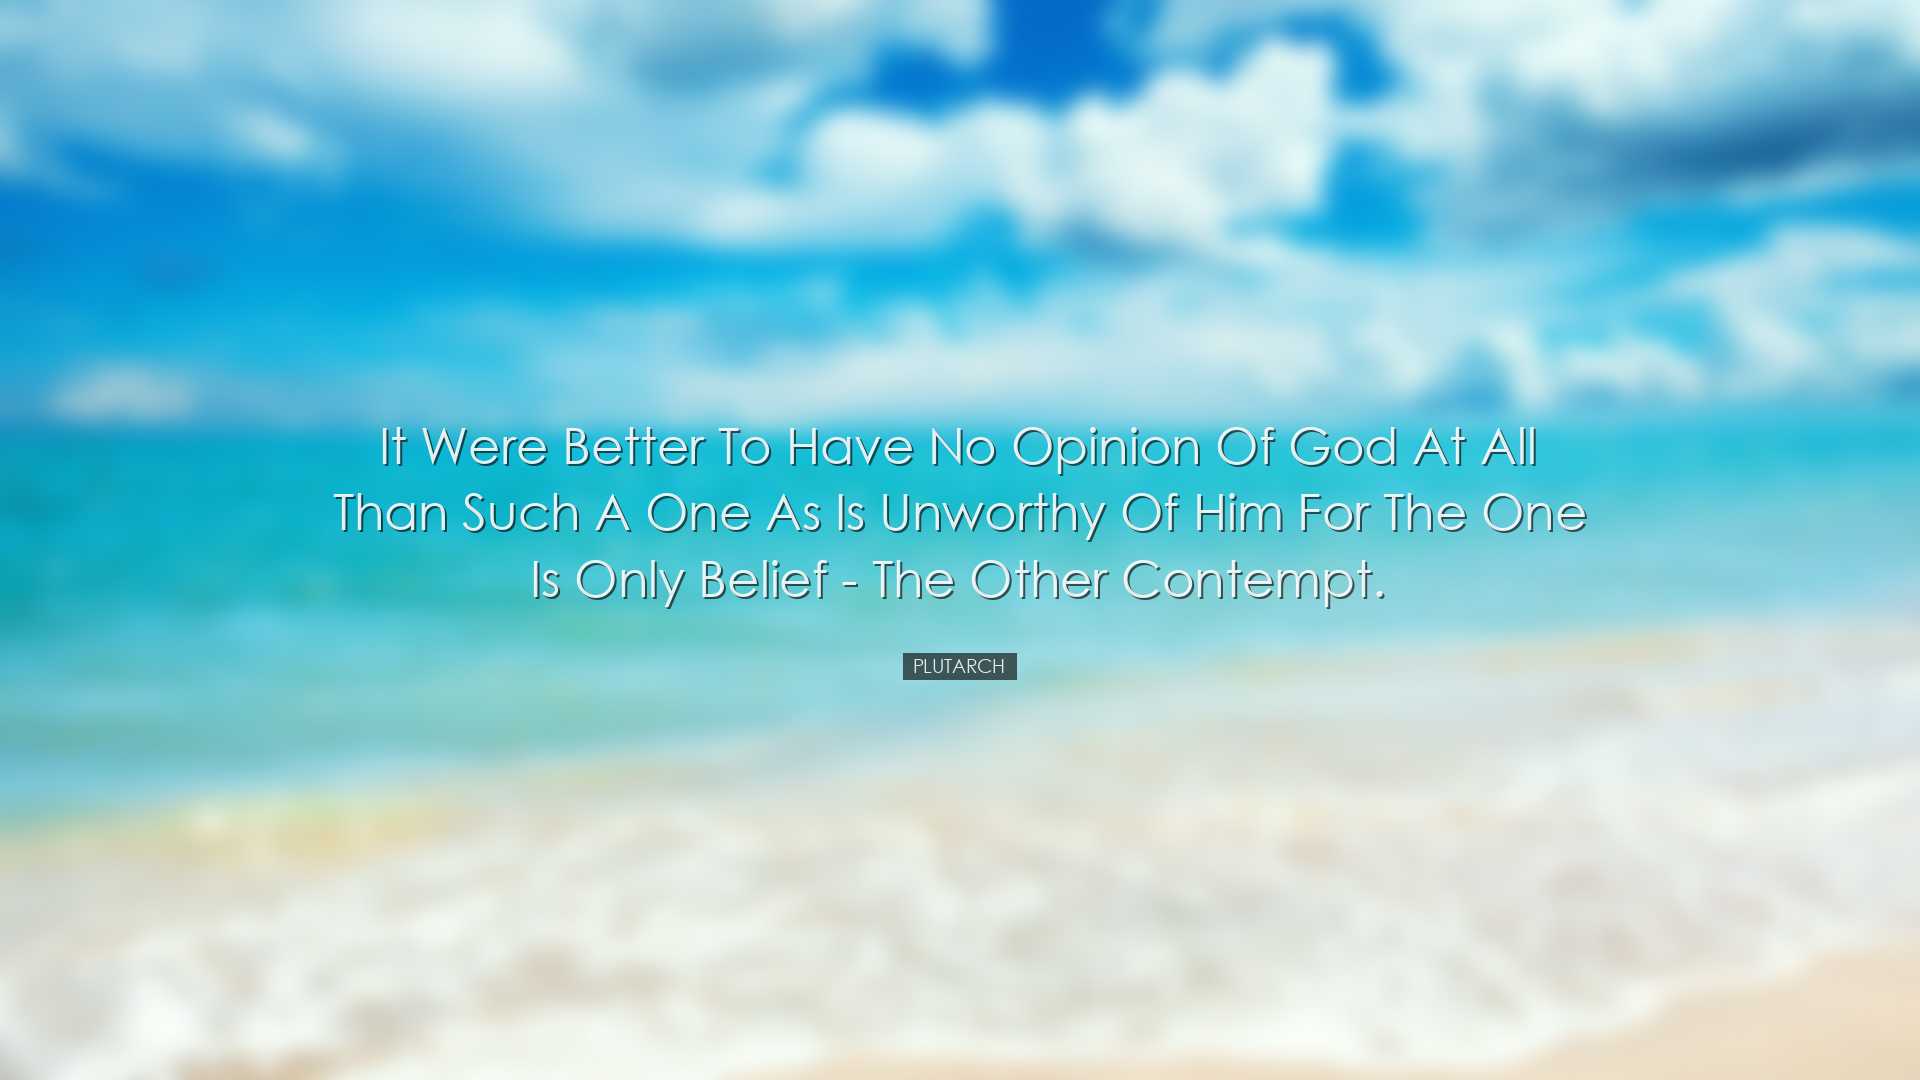 It were better to have no opinion of God at all than such a one as